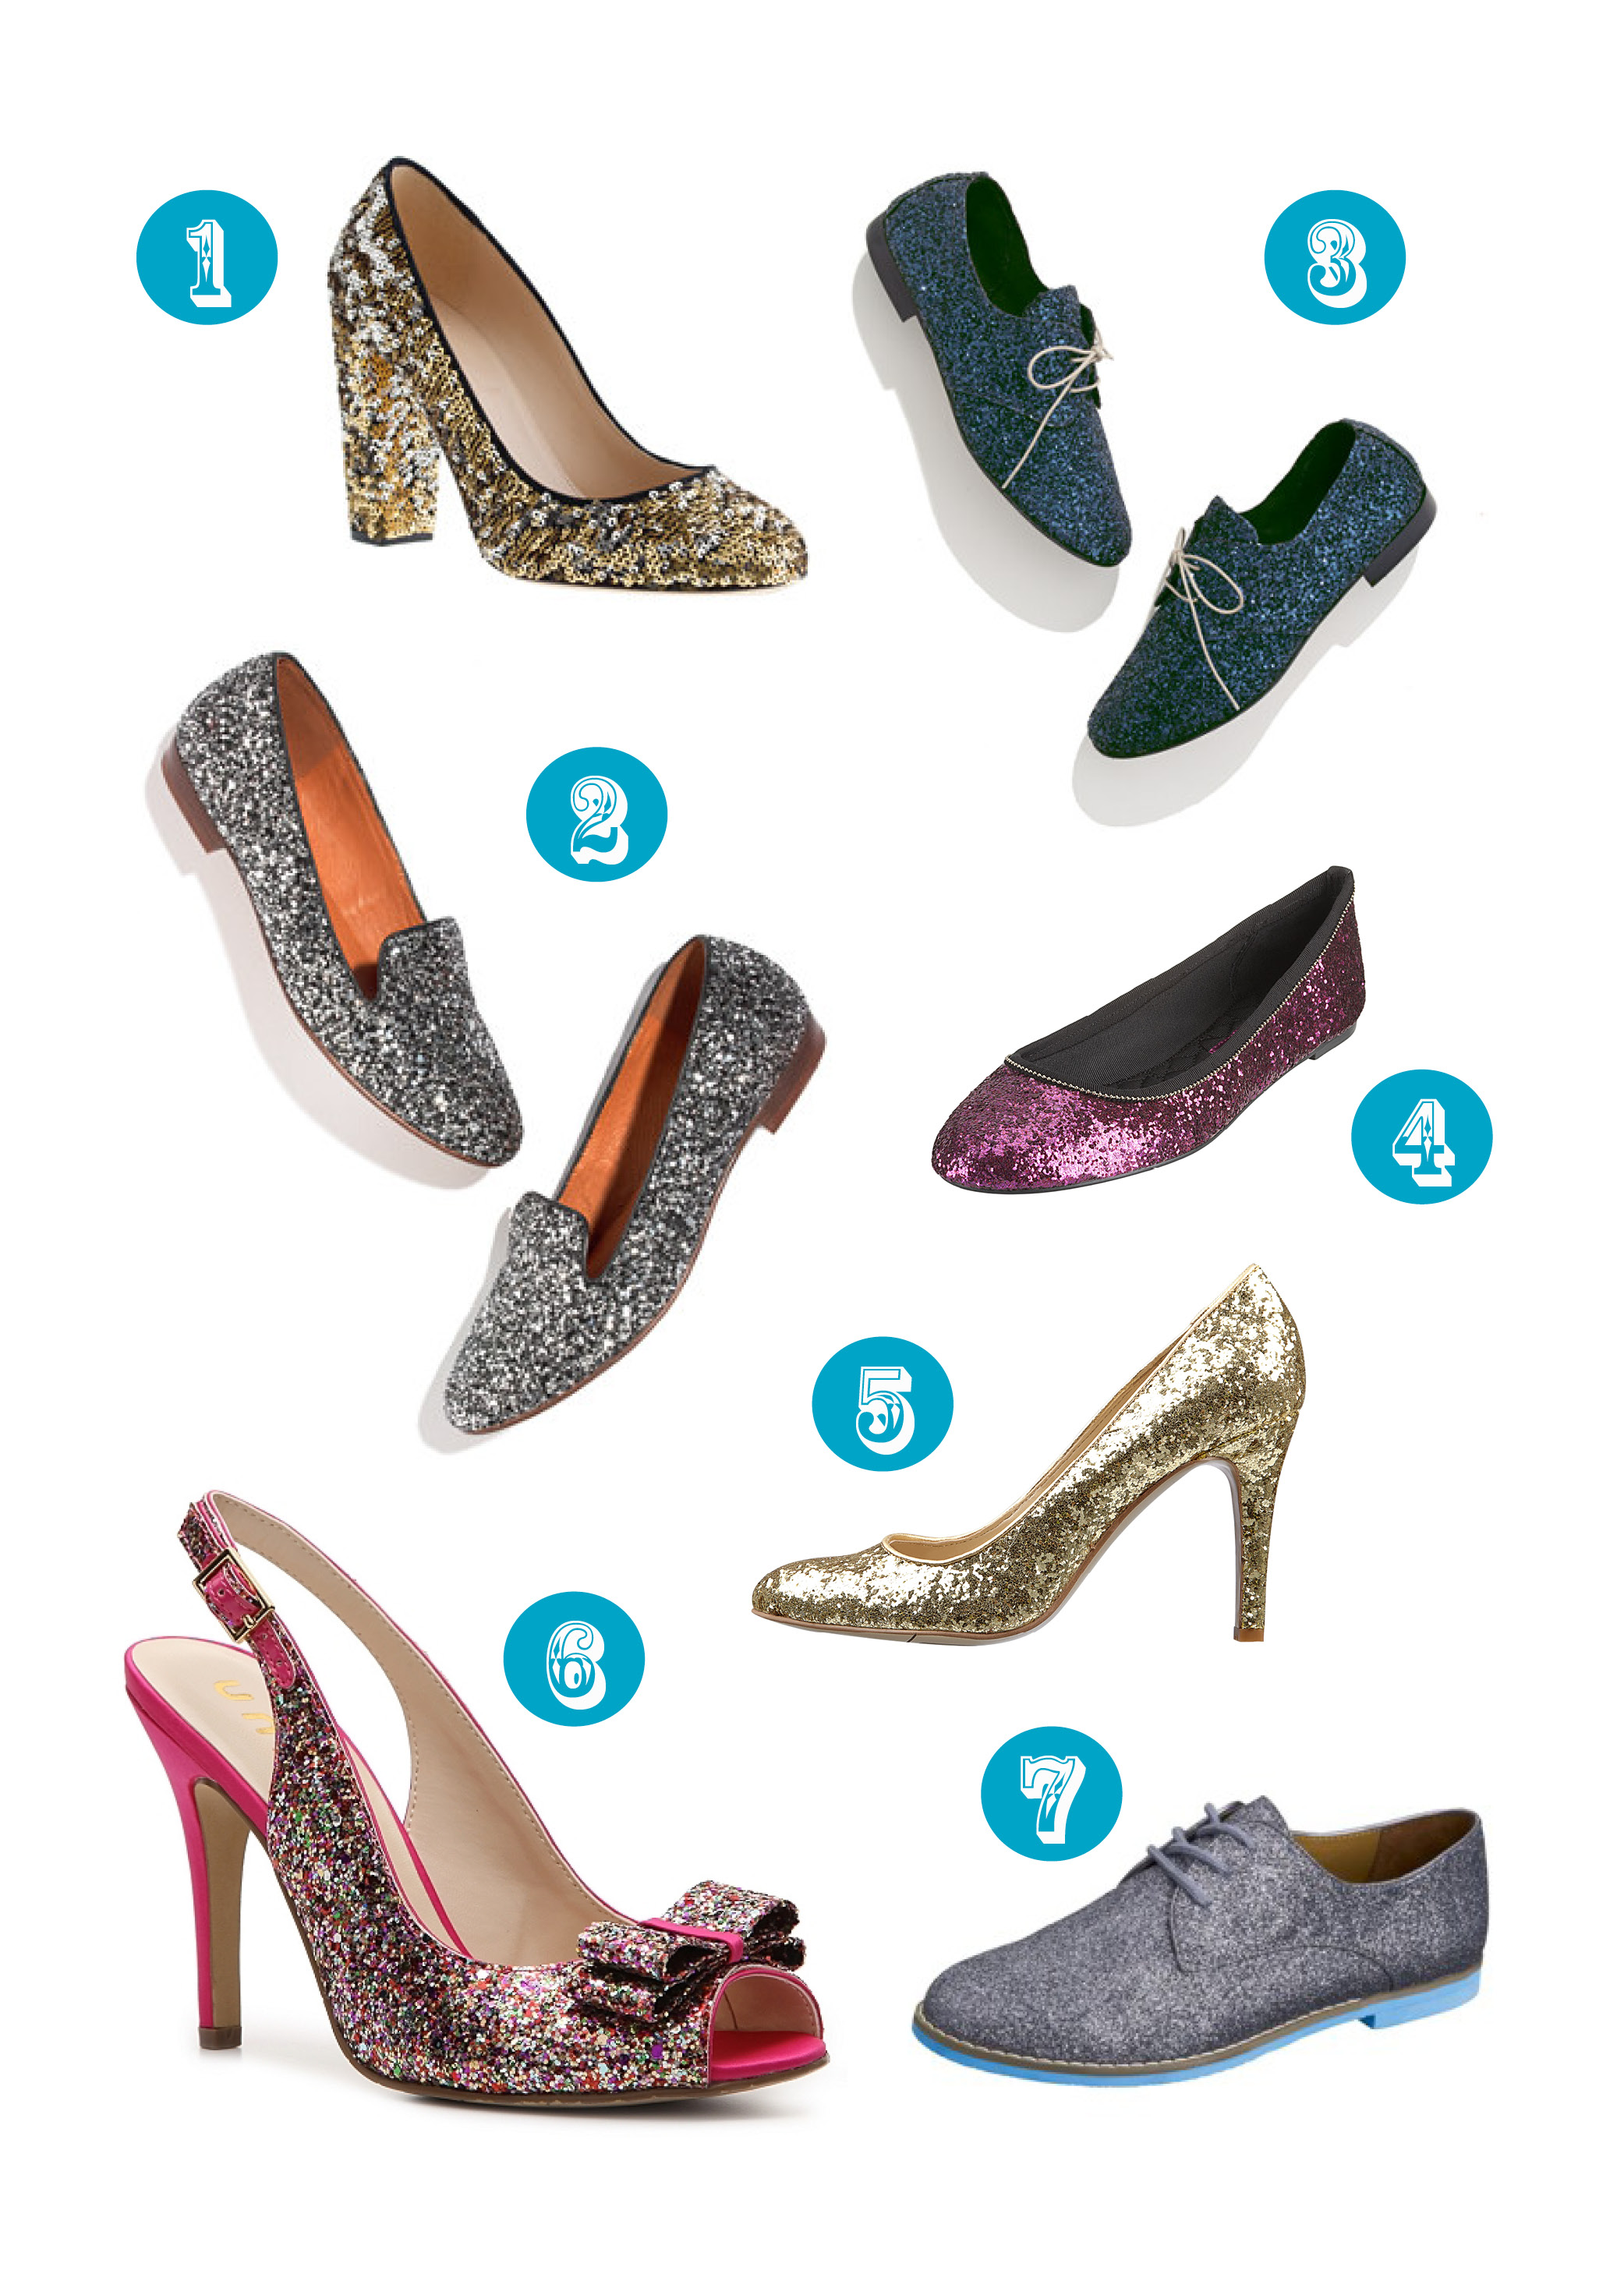 SparkleSequinShoes(1)